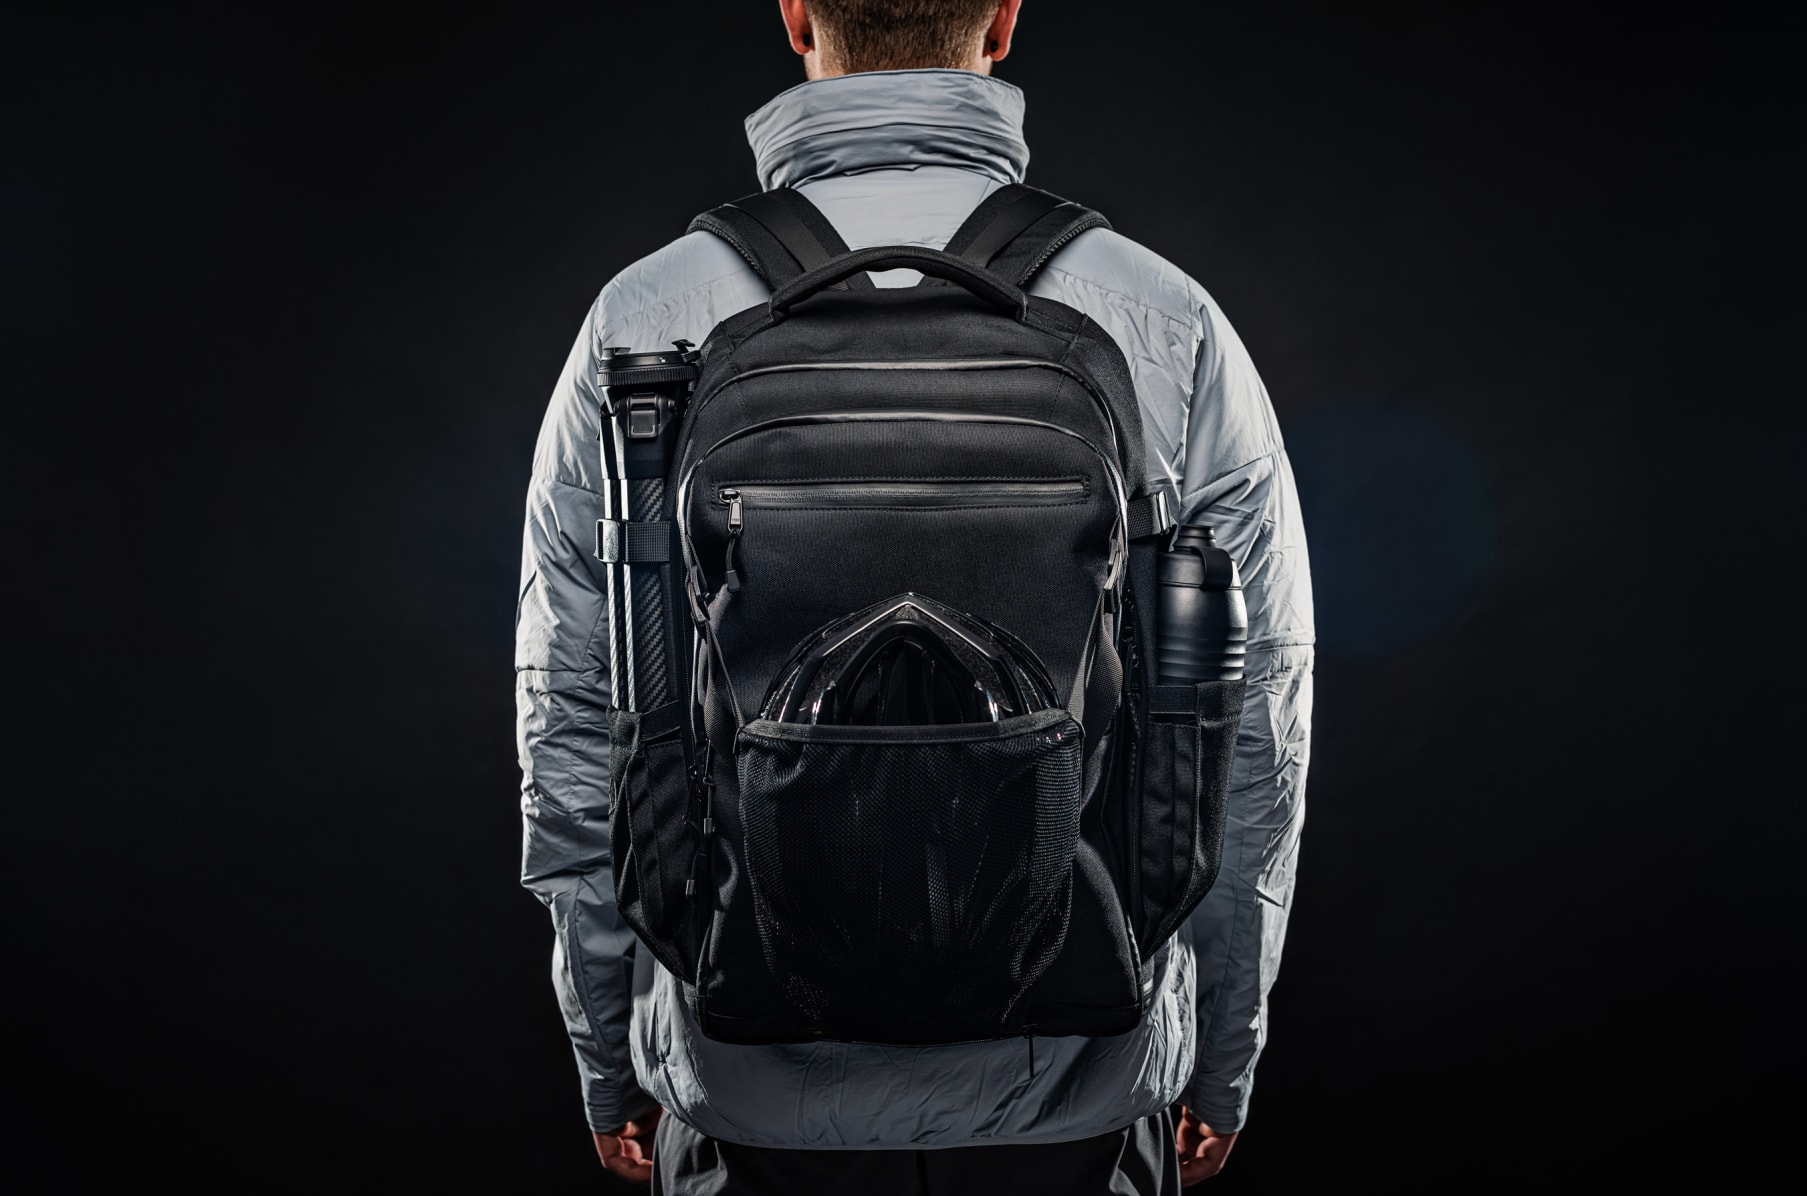 Transforming Jacket-to-Backpack-to-Pillow Design